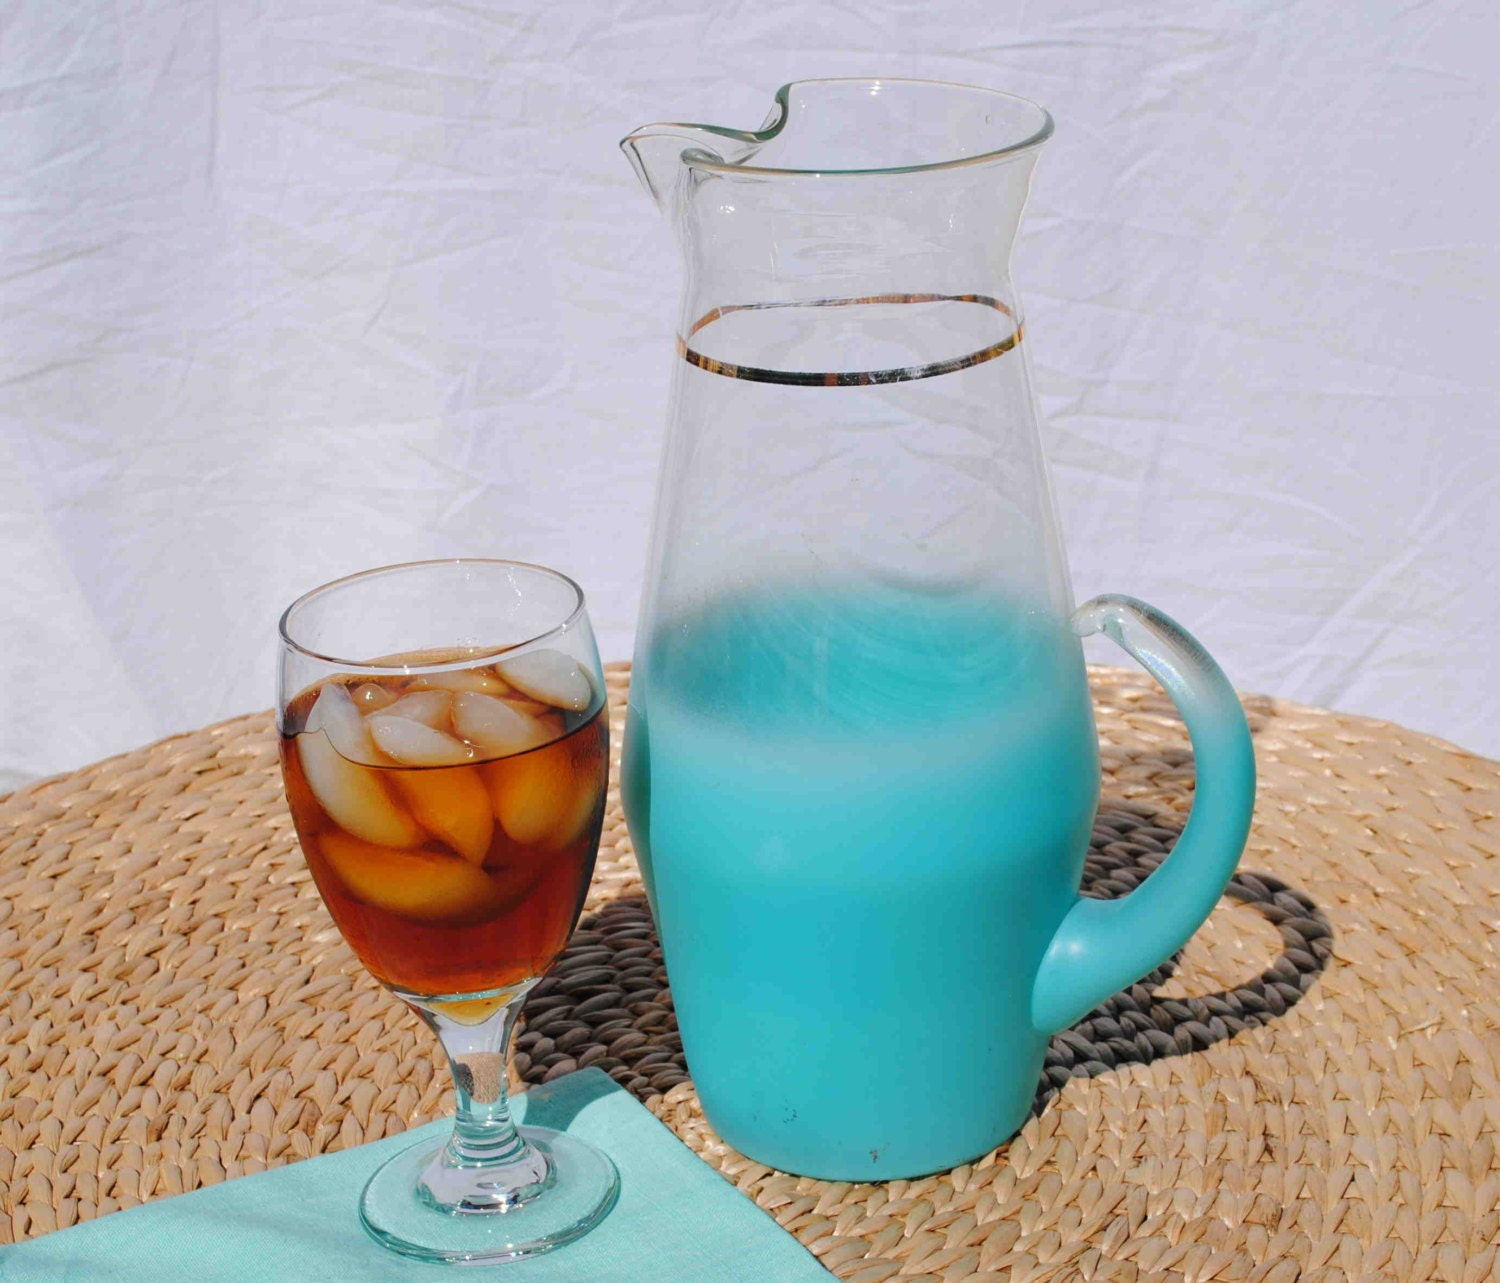 VINTAGE BLENDO GLASS Frosted Aqua Pitcher and Four Glasses by West Virginia Glass Company - BridgetsCollection